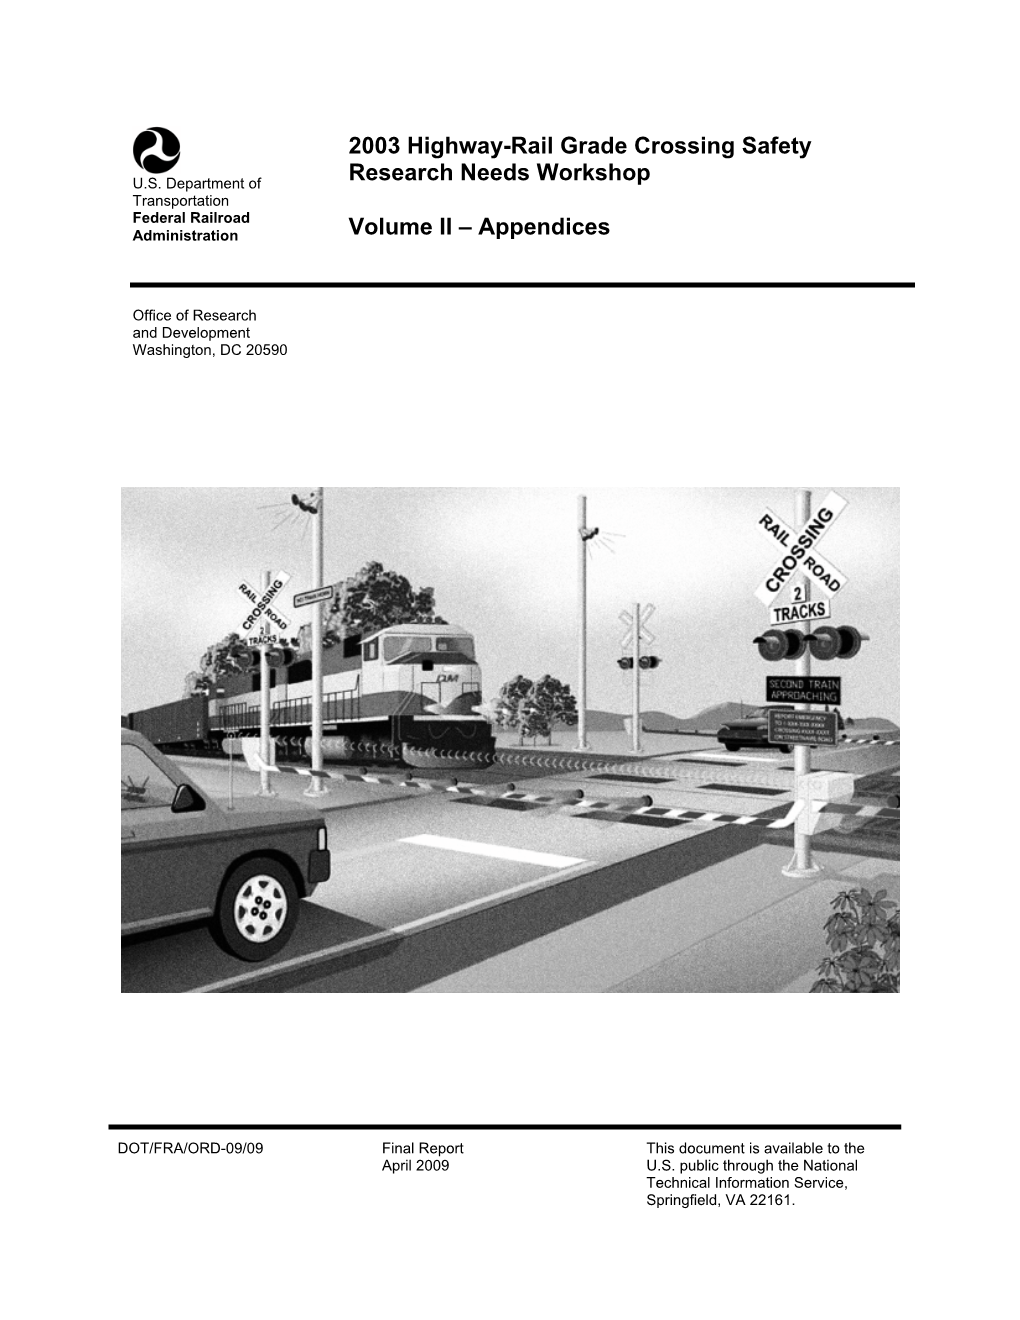 2003 Highway-Rail Grade Crossing Safety Research Needs Workshop Volume II– 1.1.1 1.1.1.1 RR97/DB063 Appendices 6